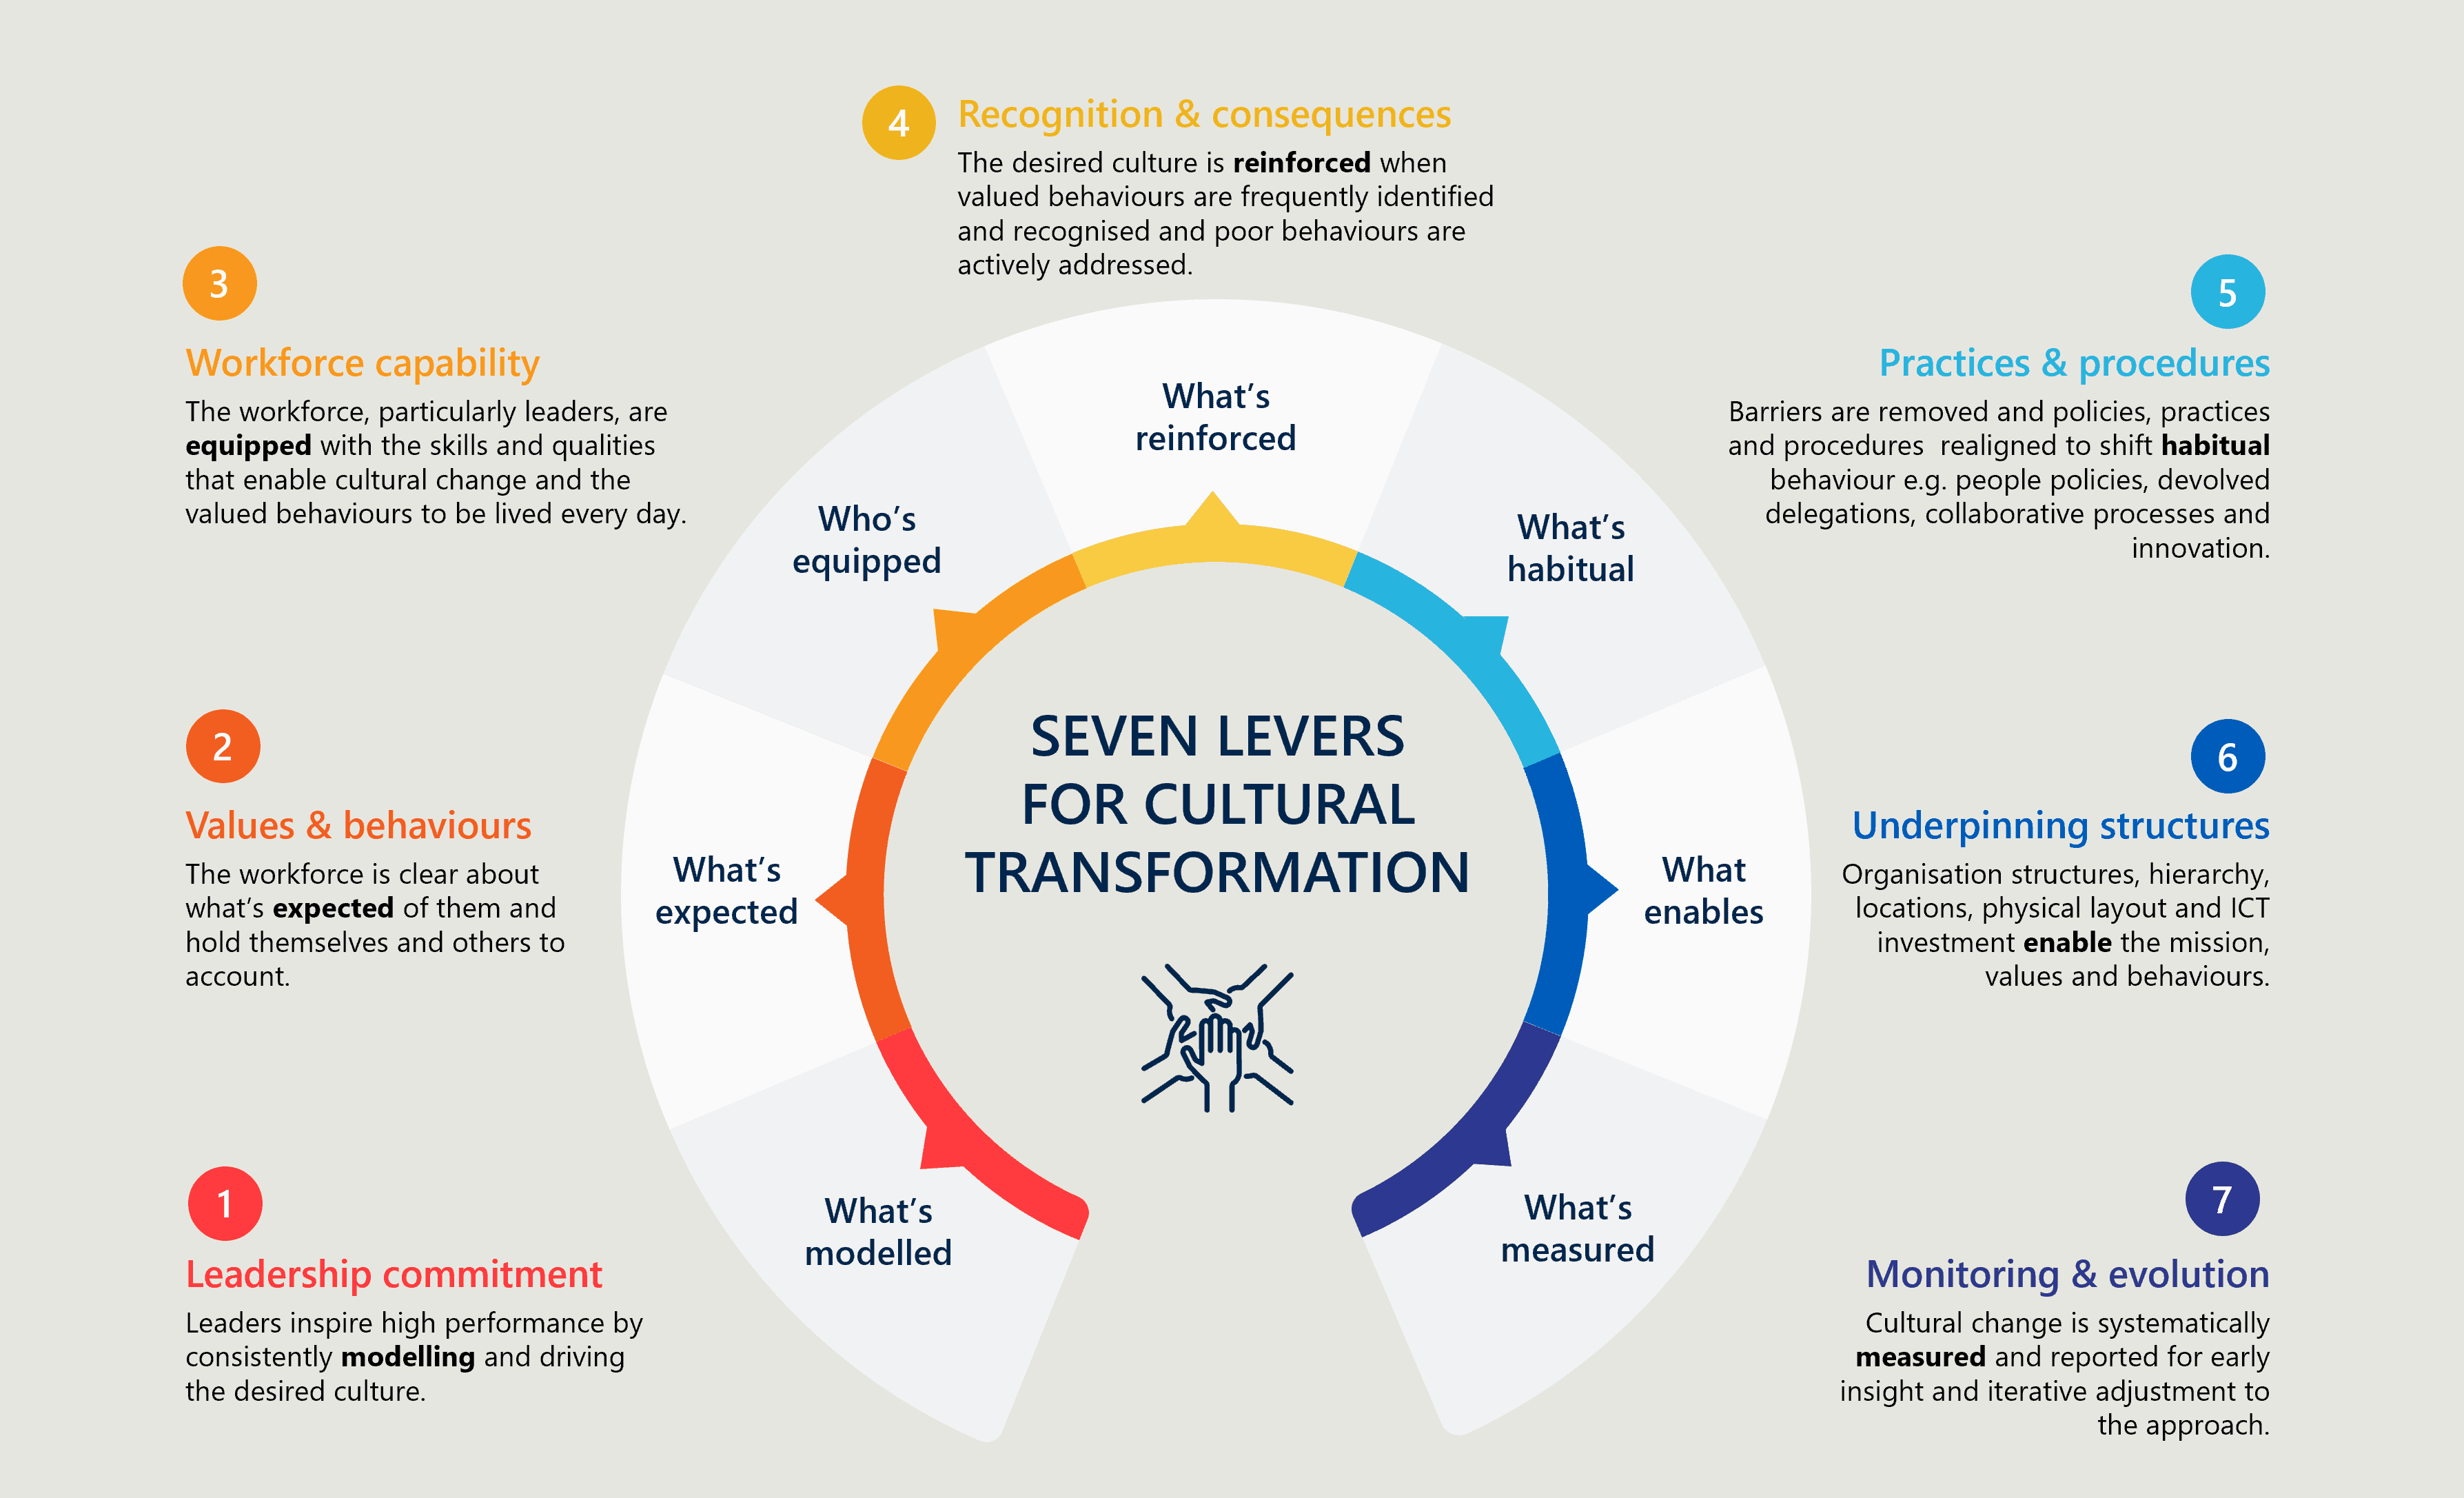 Nous Group's Seven Levers for Cultural Transformation model